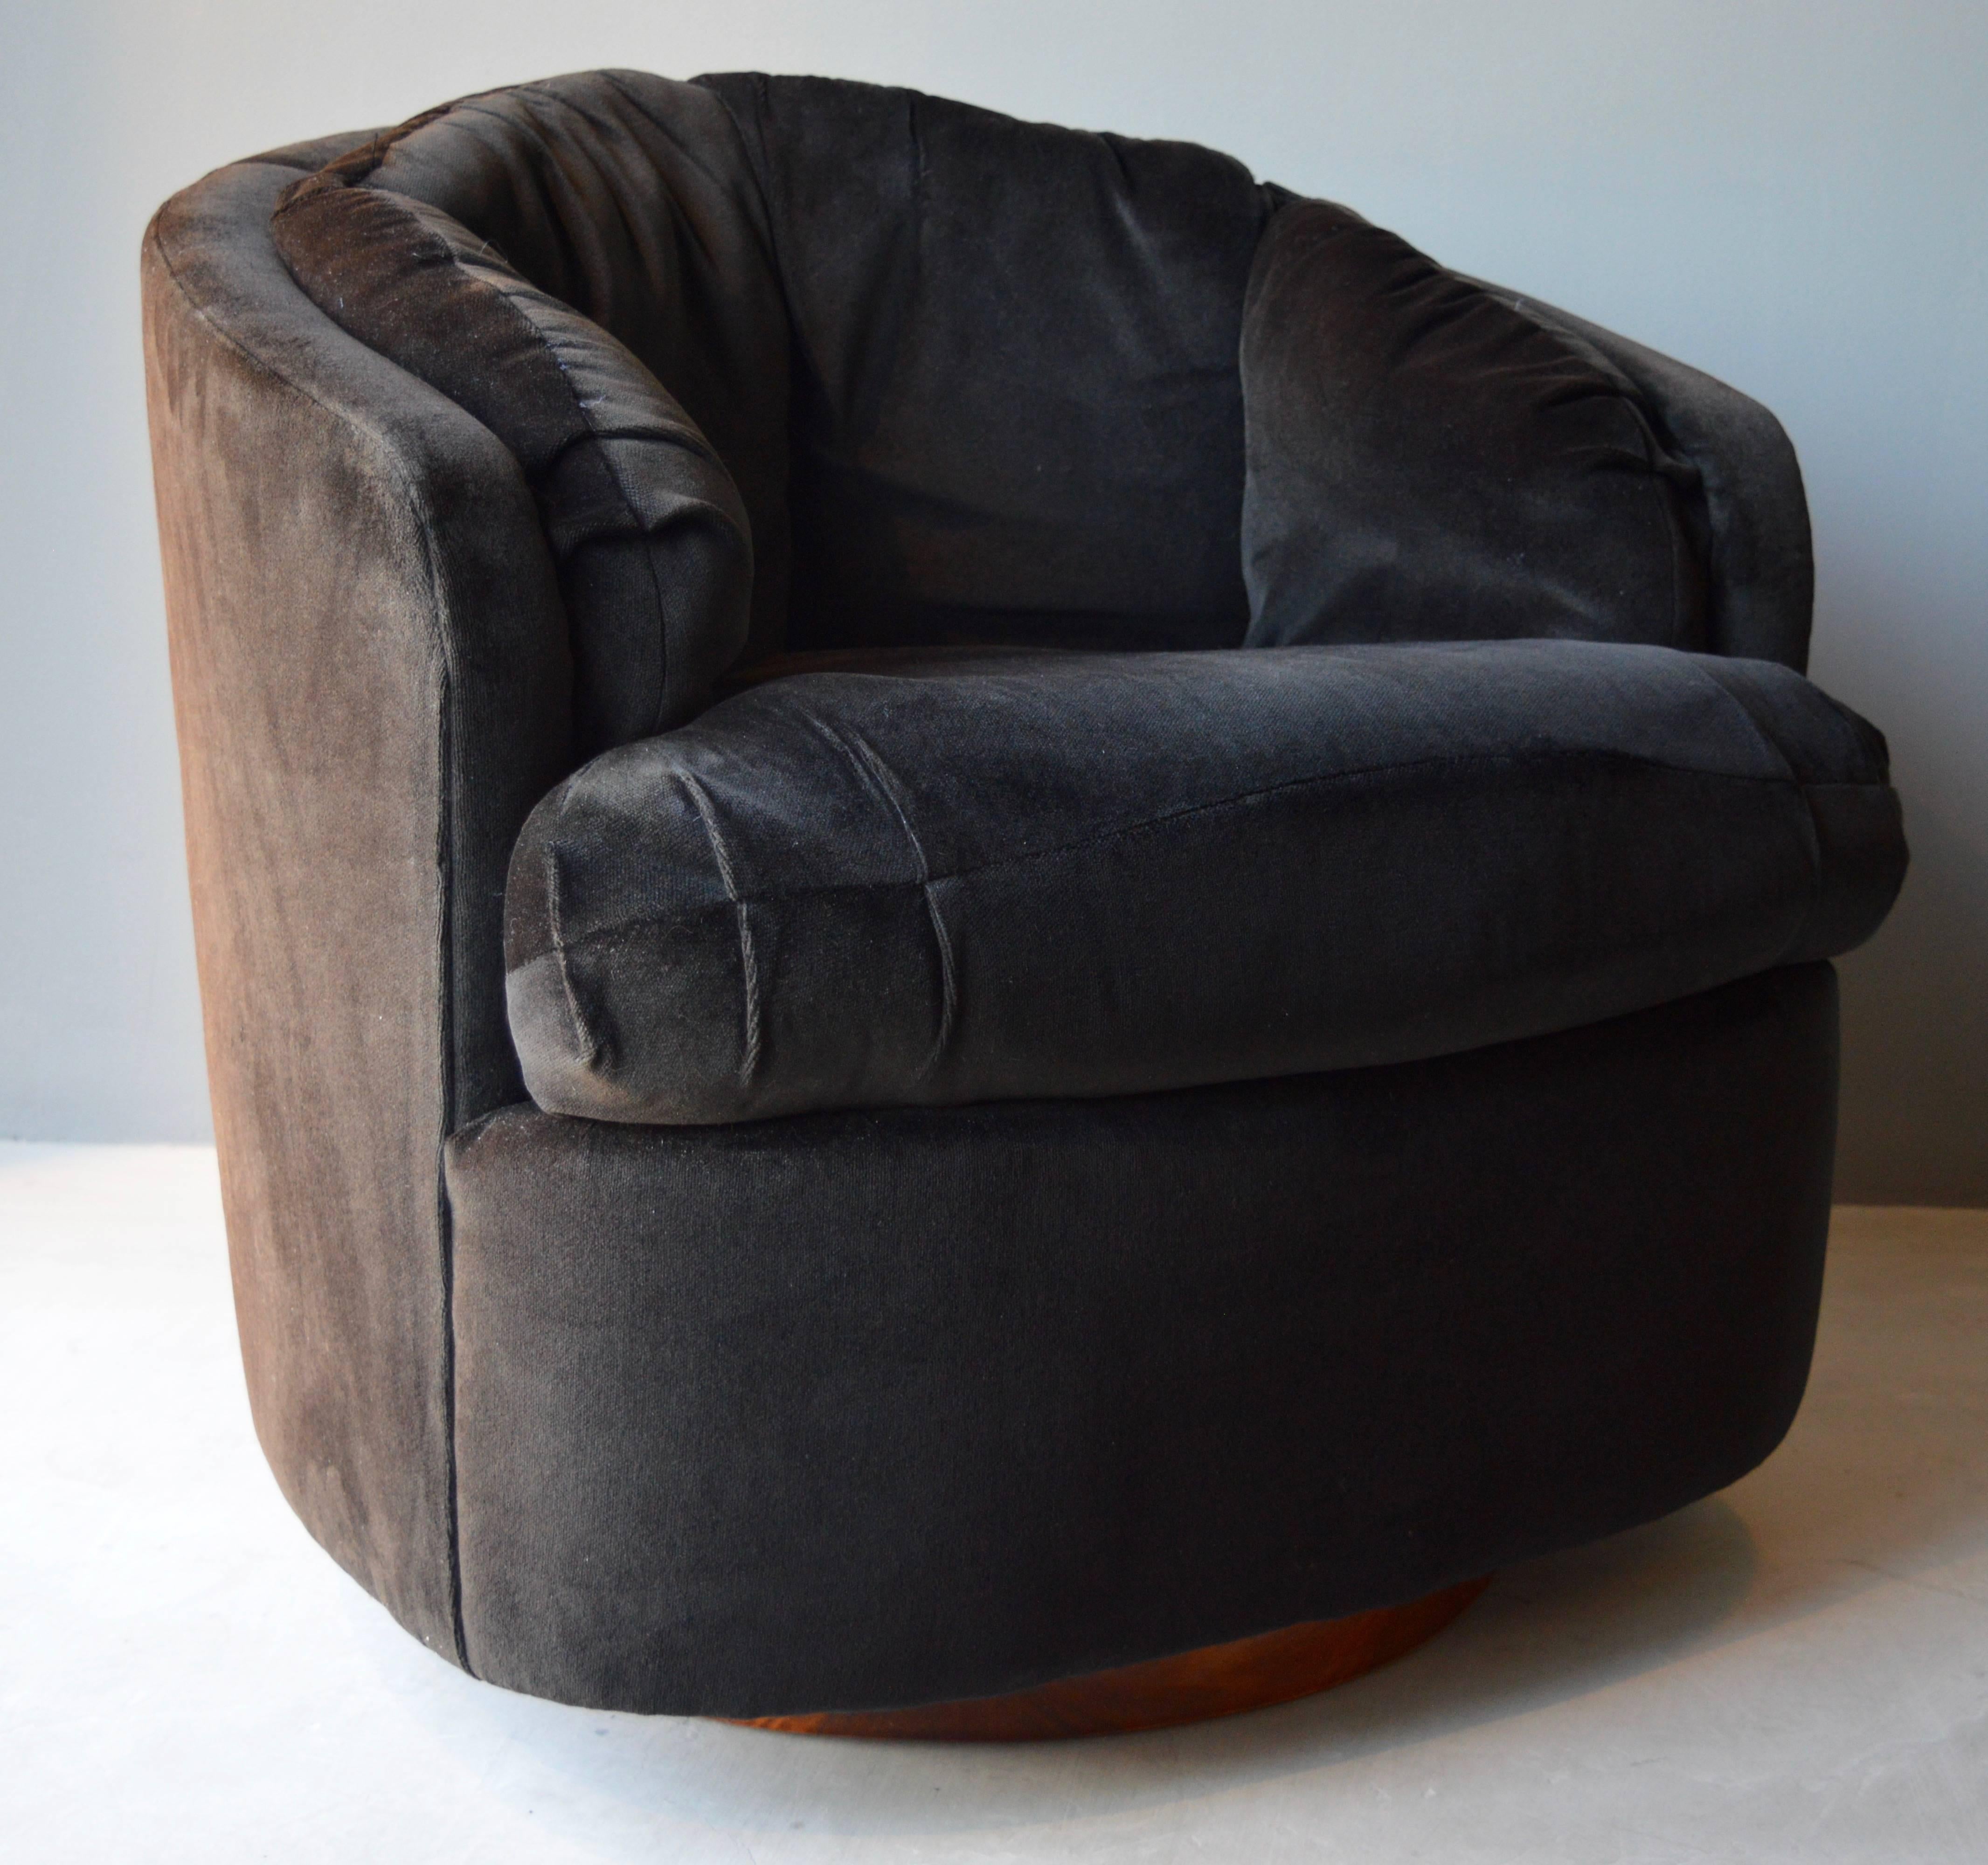 Gorgeous pair of club chairs by Milo Baughman for Thayer Coggin. Original paper label. Walnut swivel bases in excellent condition. Original black velvet upholstery. Perfect scale. COM price is 8500. Priced as is 6800.